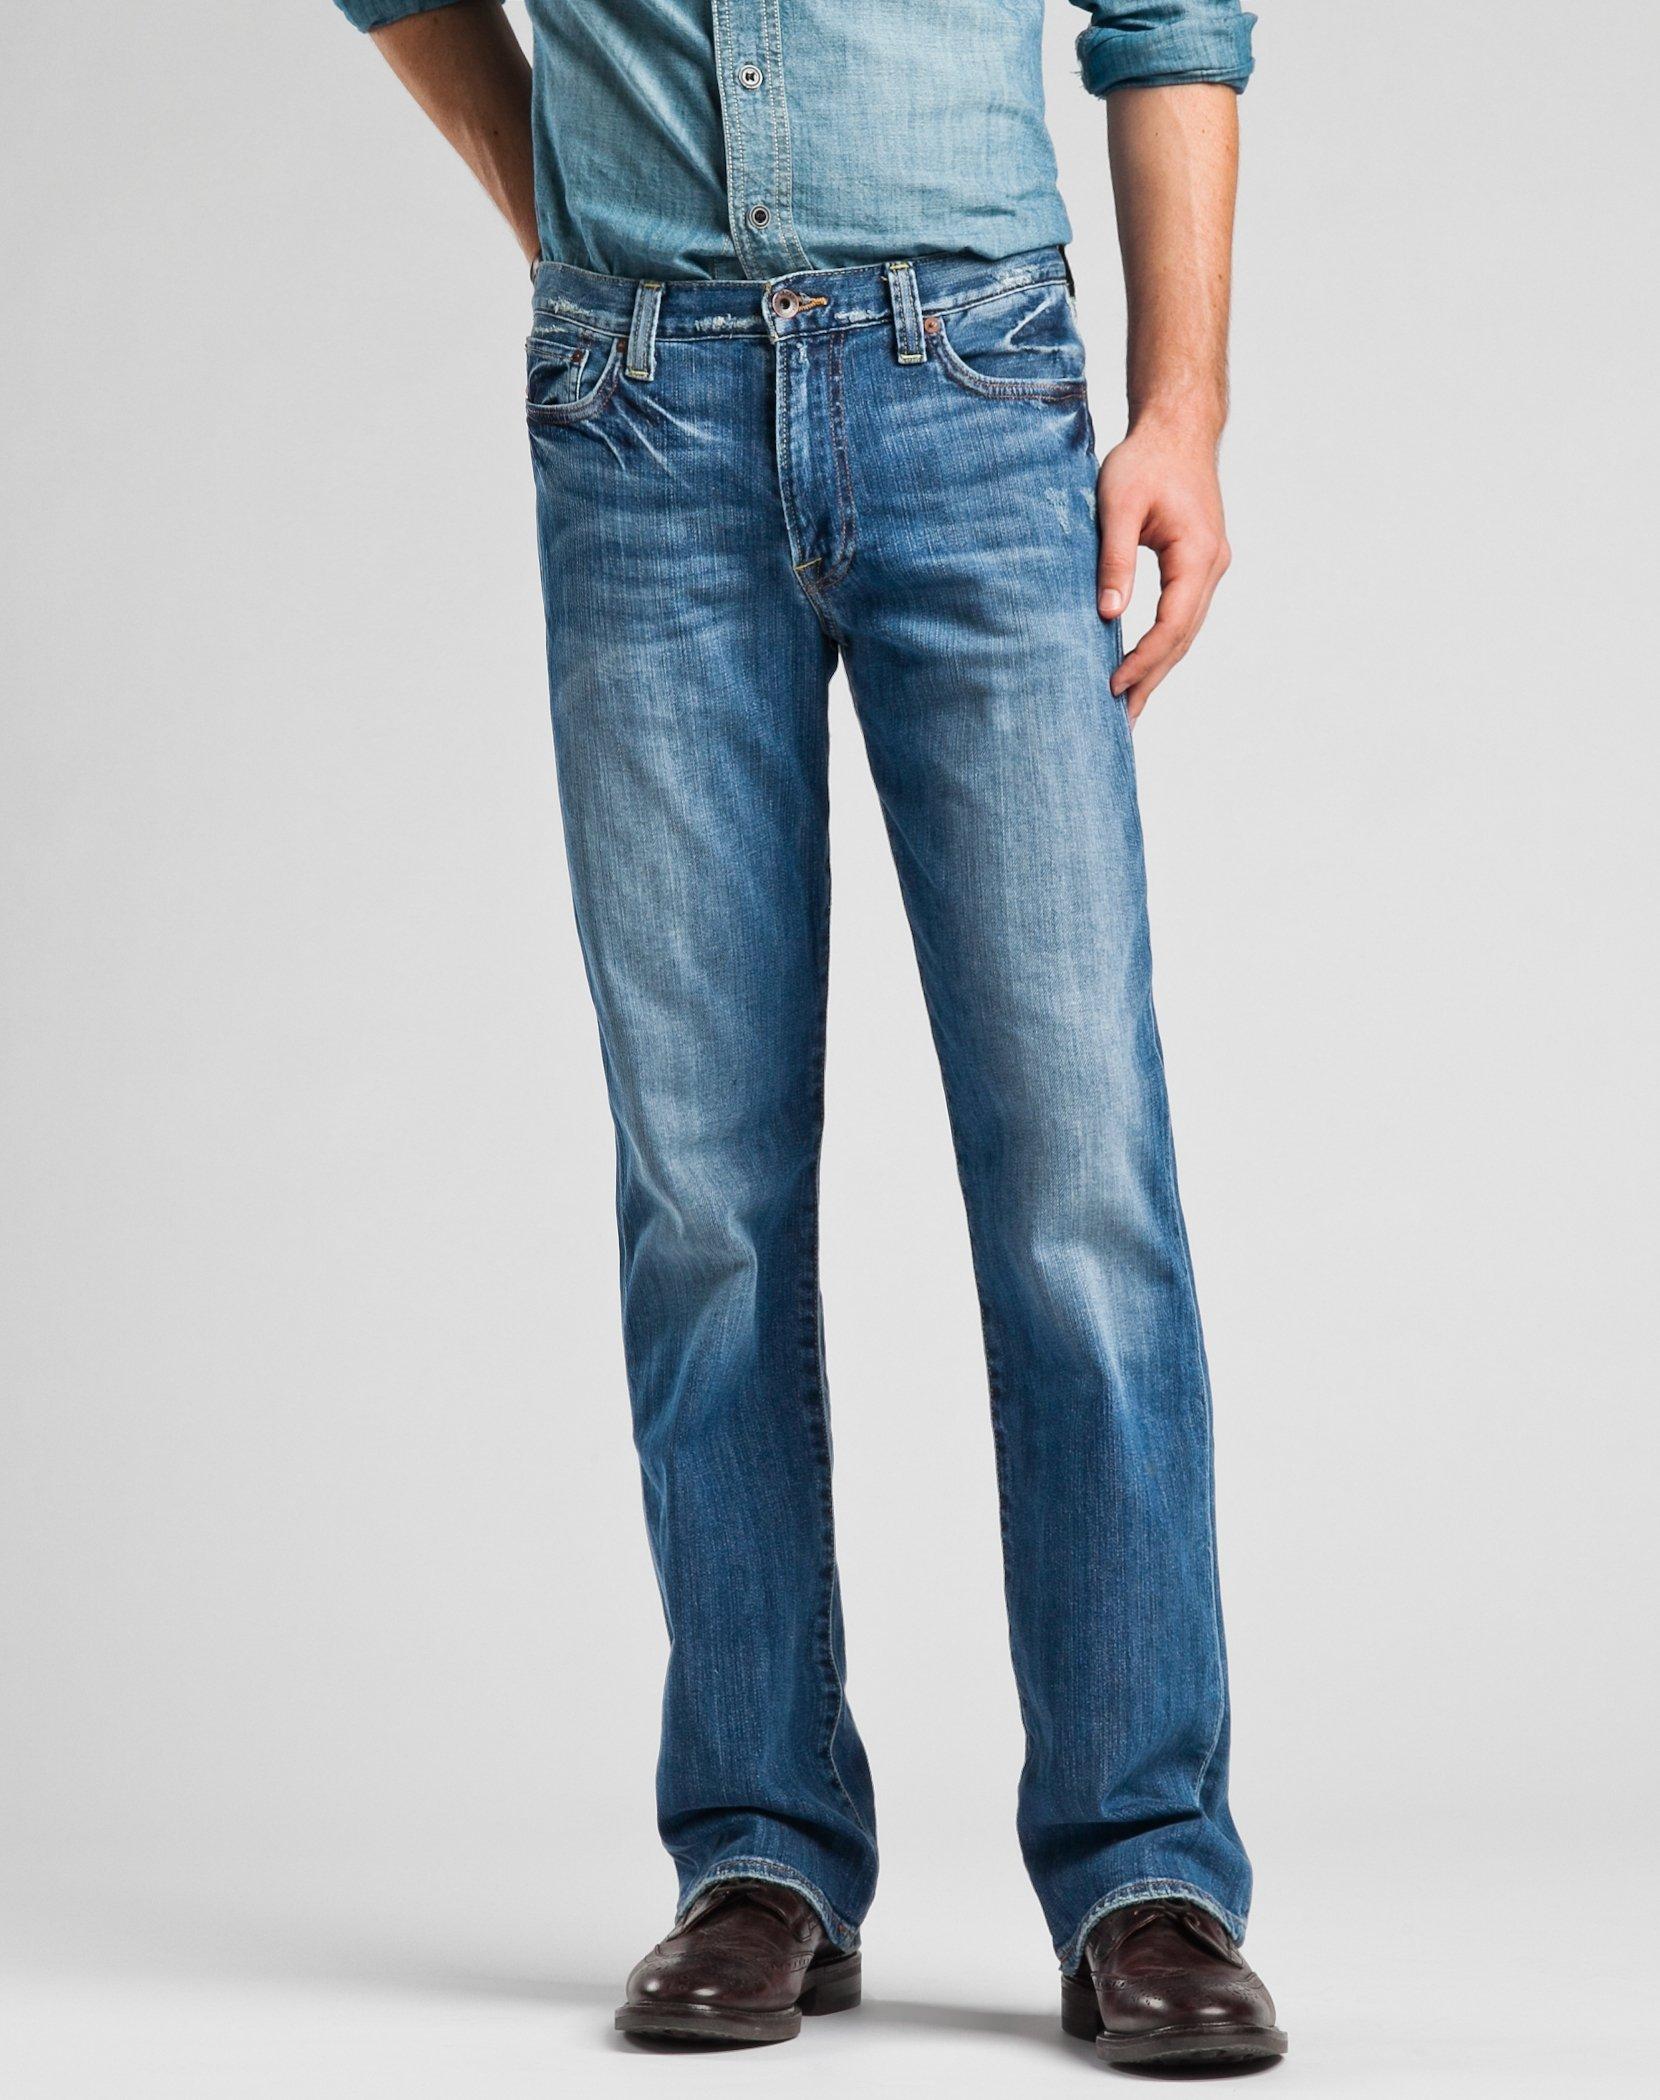 Lucky Brand Men's 361 Vintage Straight Jean, Aliso Viejo, 29W X 30L at   Men's Clothing store